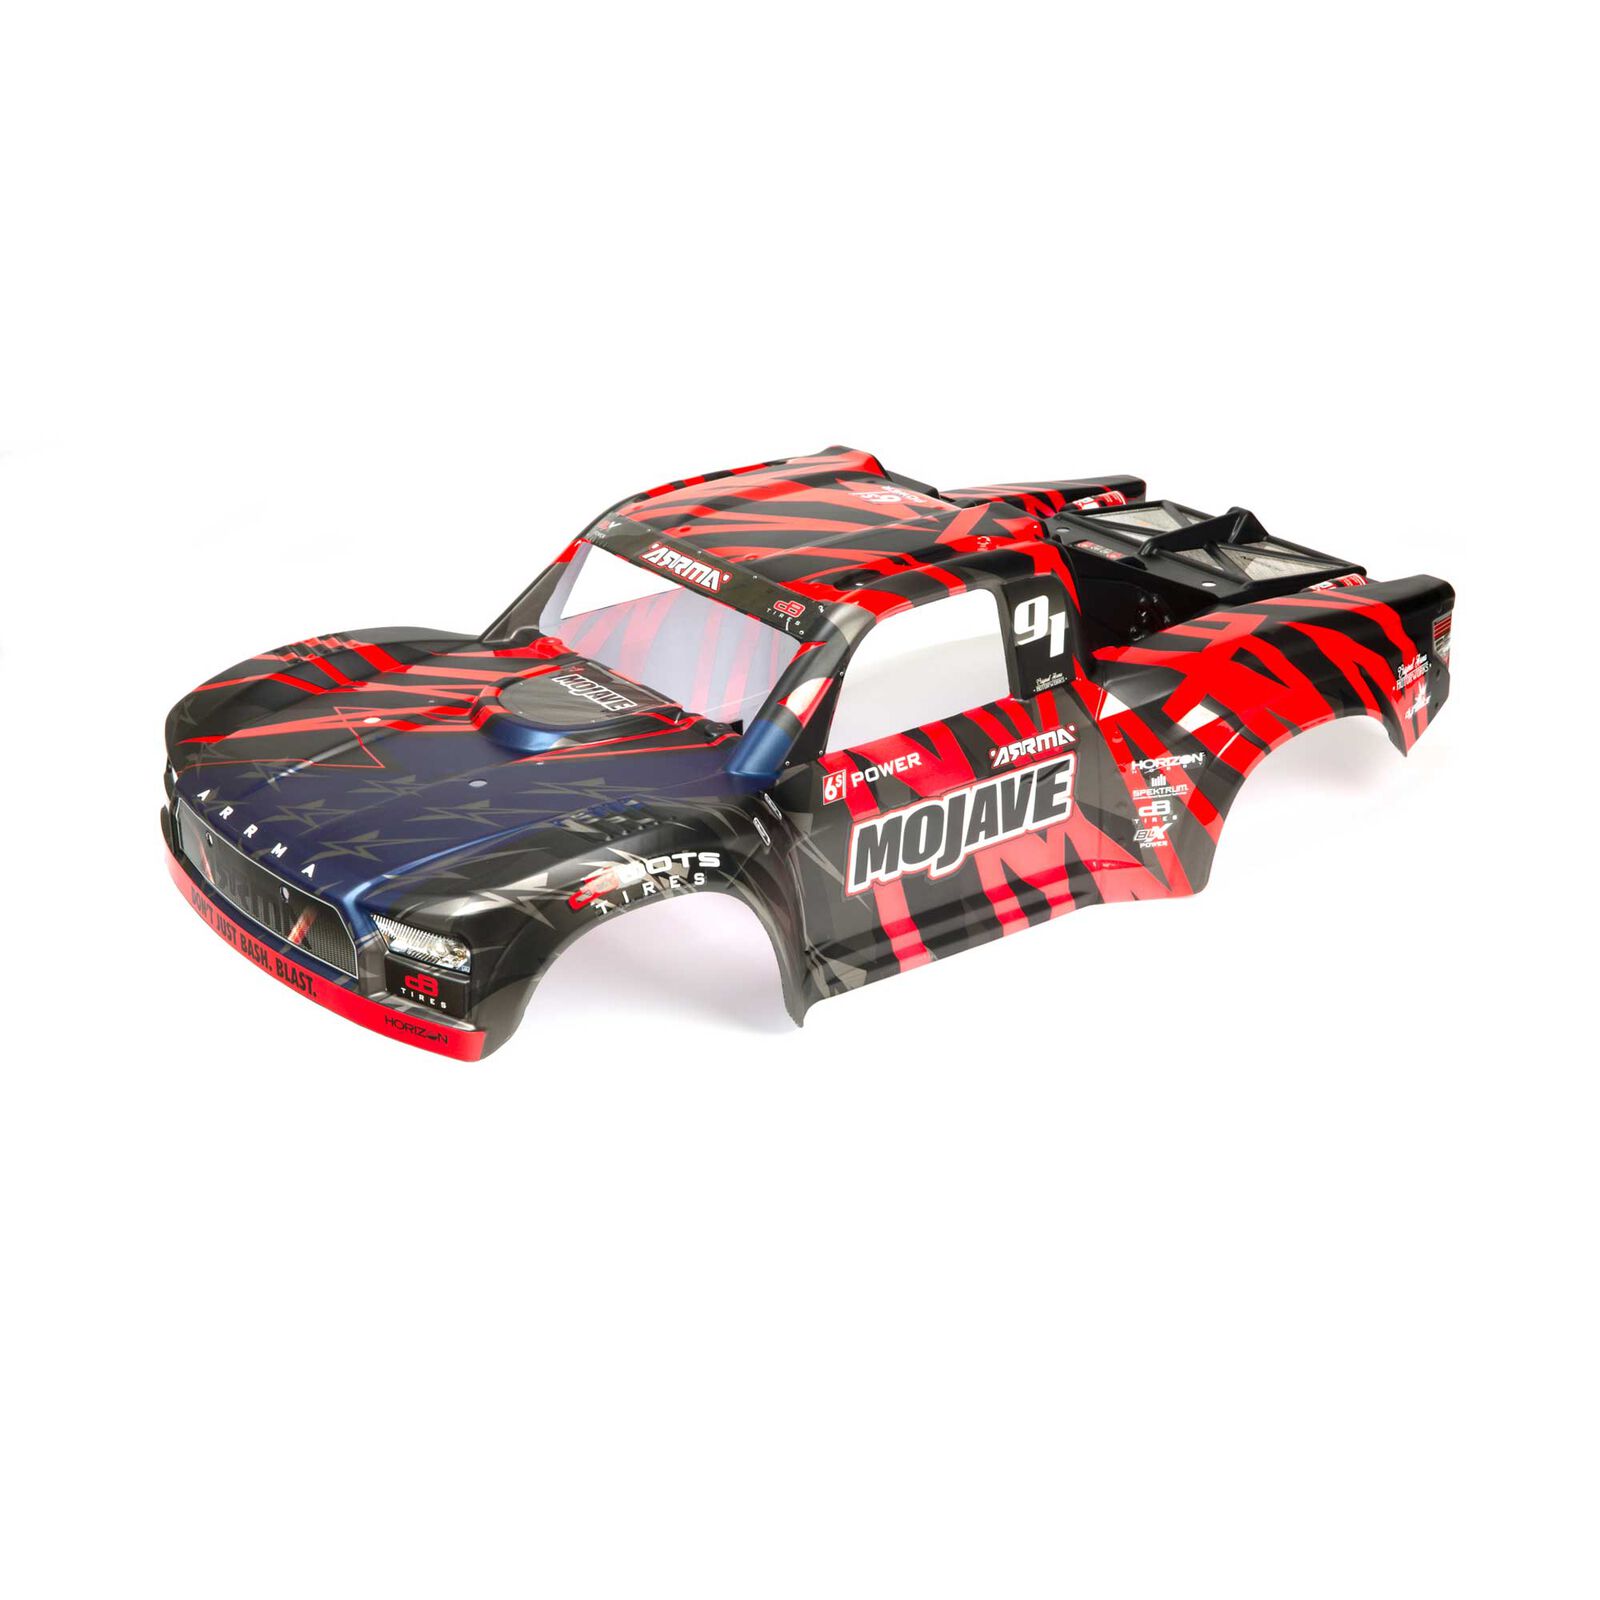 1/7 Painted Body, Black/Red: MOJAVE 6S BLX